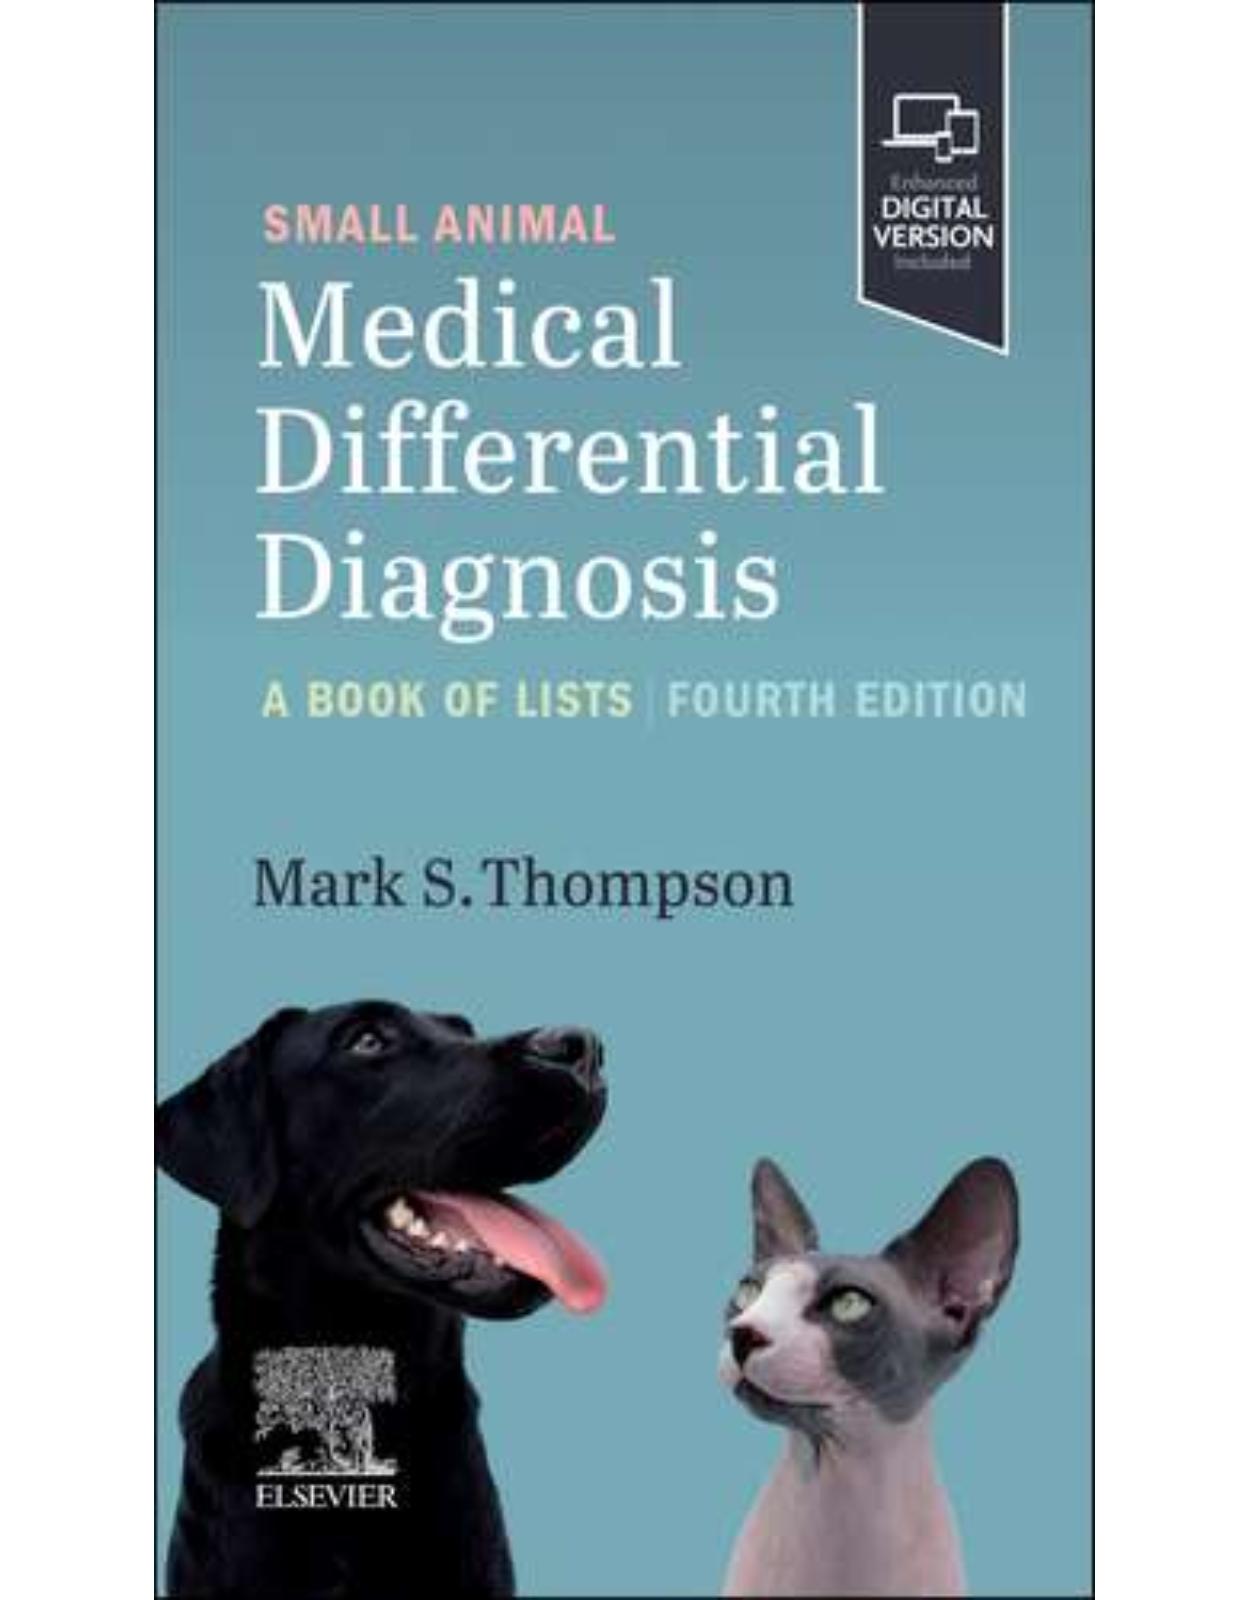 Small Animal Medical Differential Diagnosis, 4th Edition